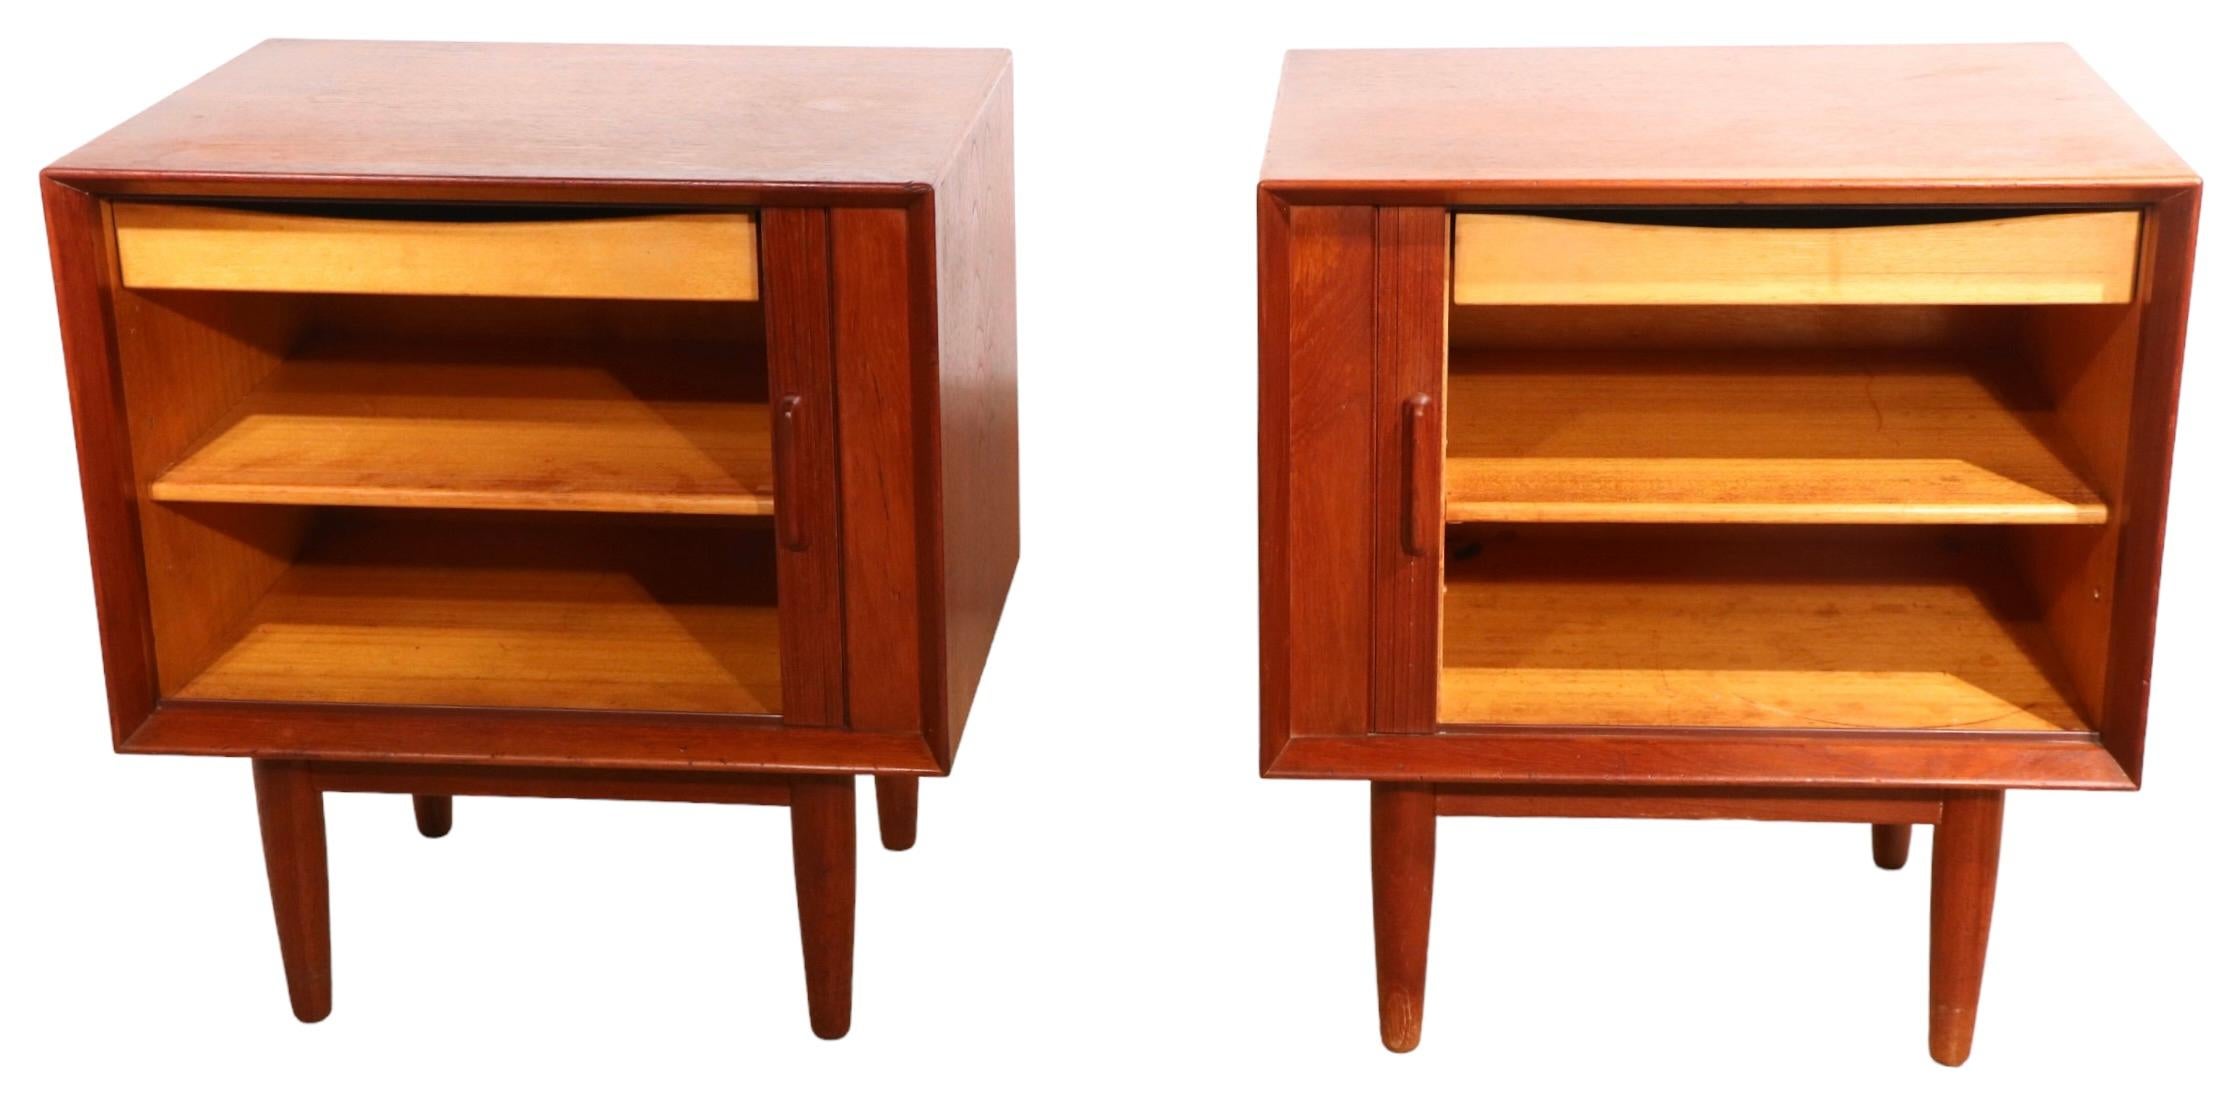 Architectural Danish Mid-Century Modern nightstands in teak, made in Denmark by Falster Mobelfabrik - circa 1950/1960’s.
The night tables feature a tambour roll front which opens to reveal a shelved storage bin, and an interior drawer. Both tables